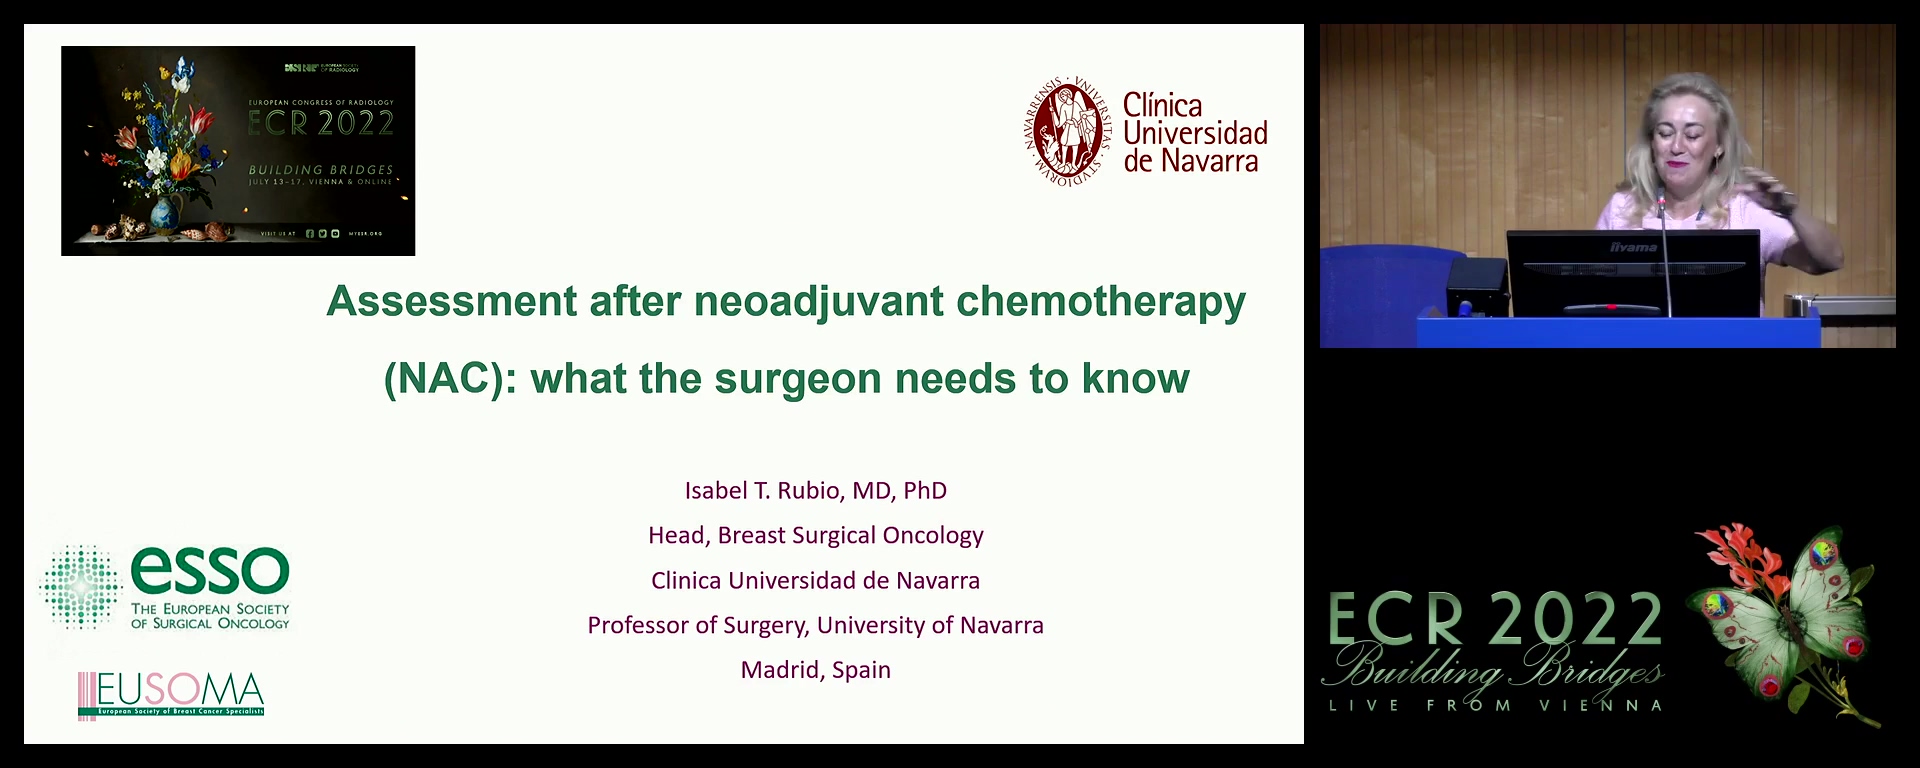 Assessment after neoadjuvant chemotherapy (NAC): what the surgeon needs to know